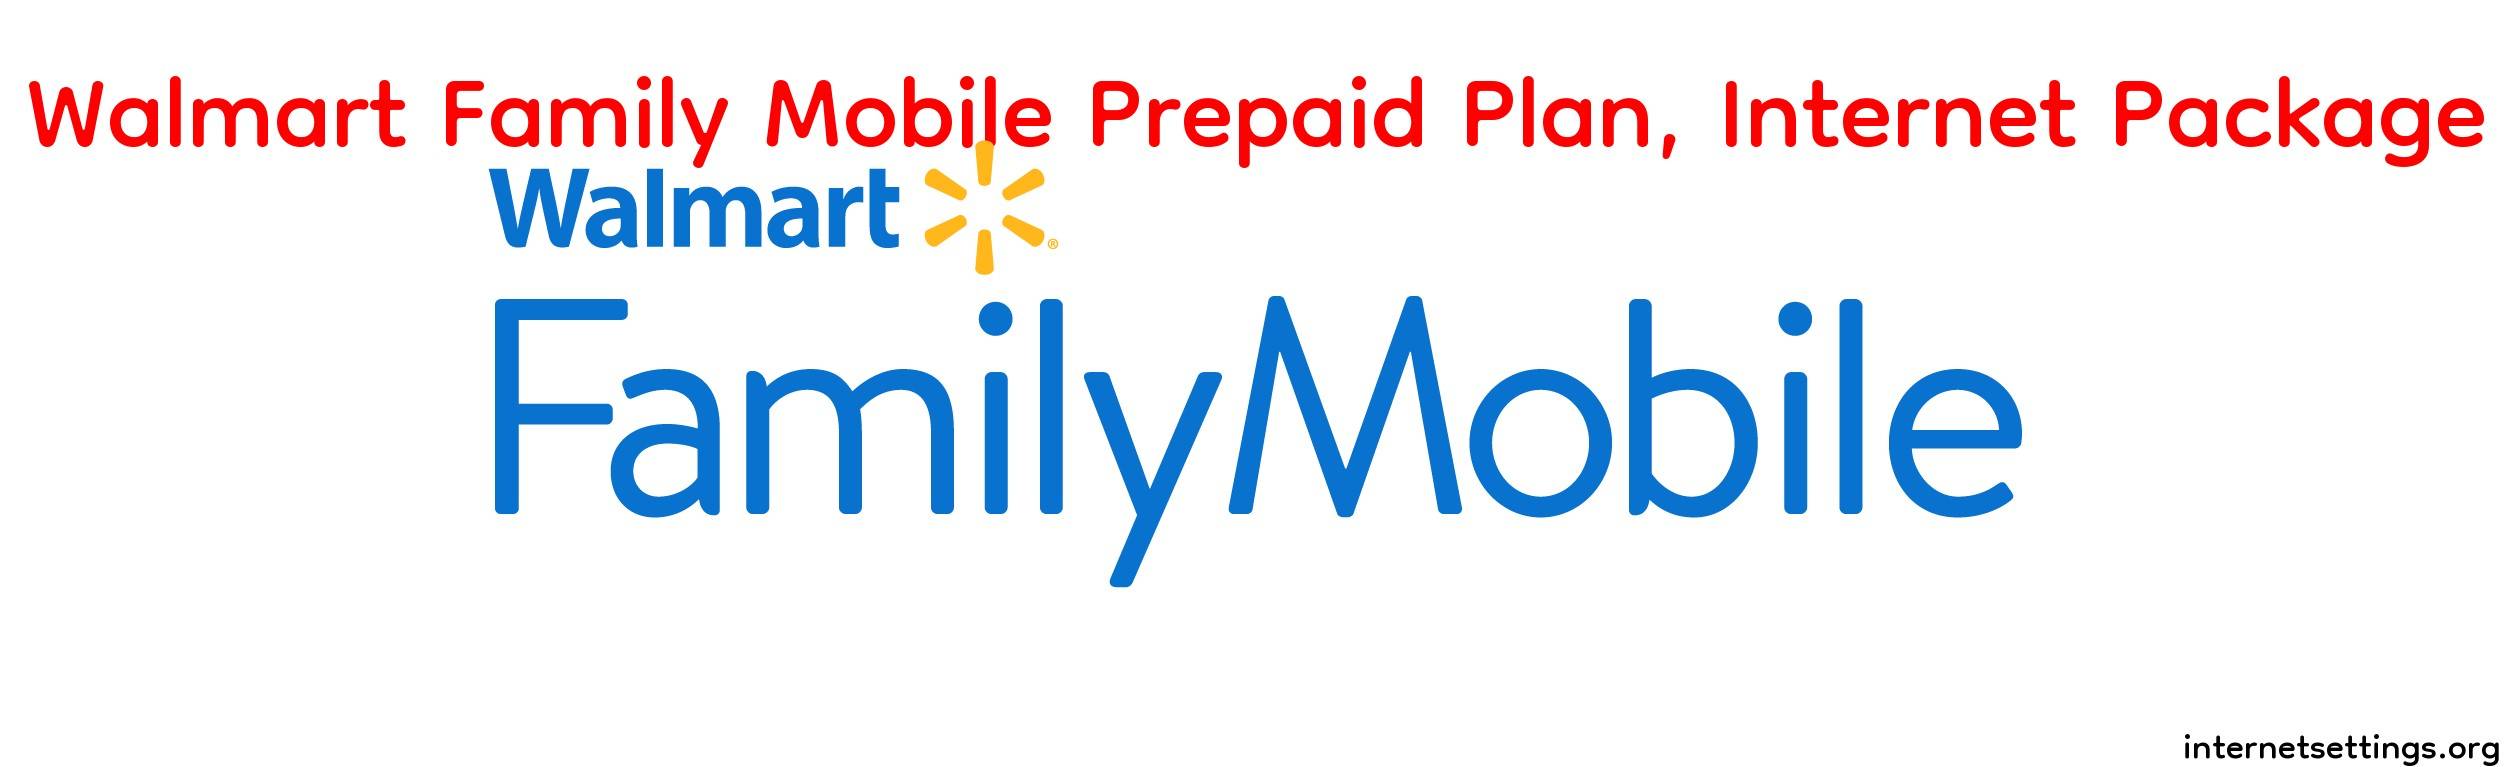 Walmart Family Mobile Prepaid Plan And Internet Package